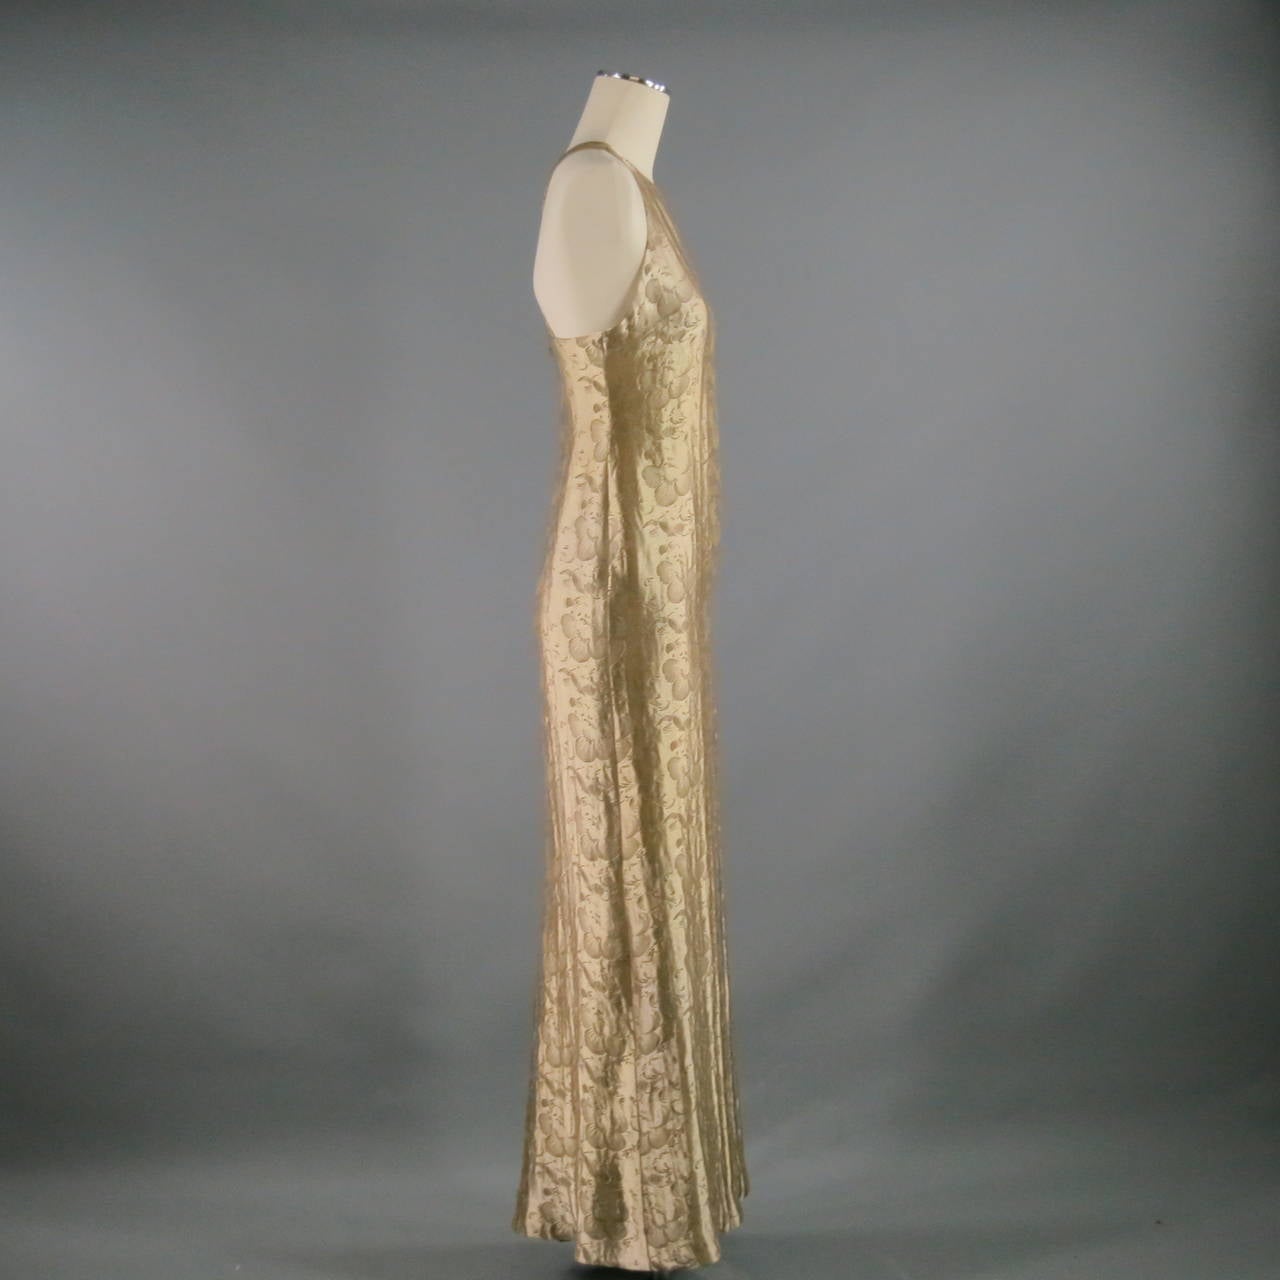 Stunning platinum evening gown from Ralph Lauren Collection. This metallic poly silk dress features a jacquard, floral with criss cross back design. Made in USA

Excellent Pre-Owned Condition
 
Measurements:
Shoulder: 10 inches
Bust: 14.5